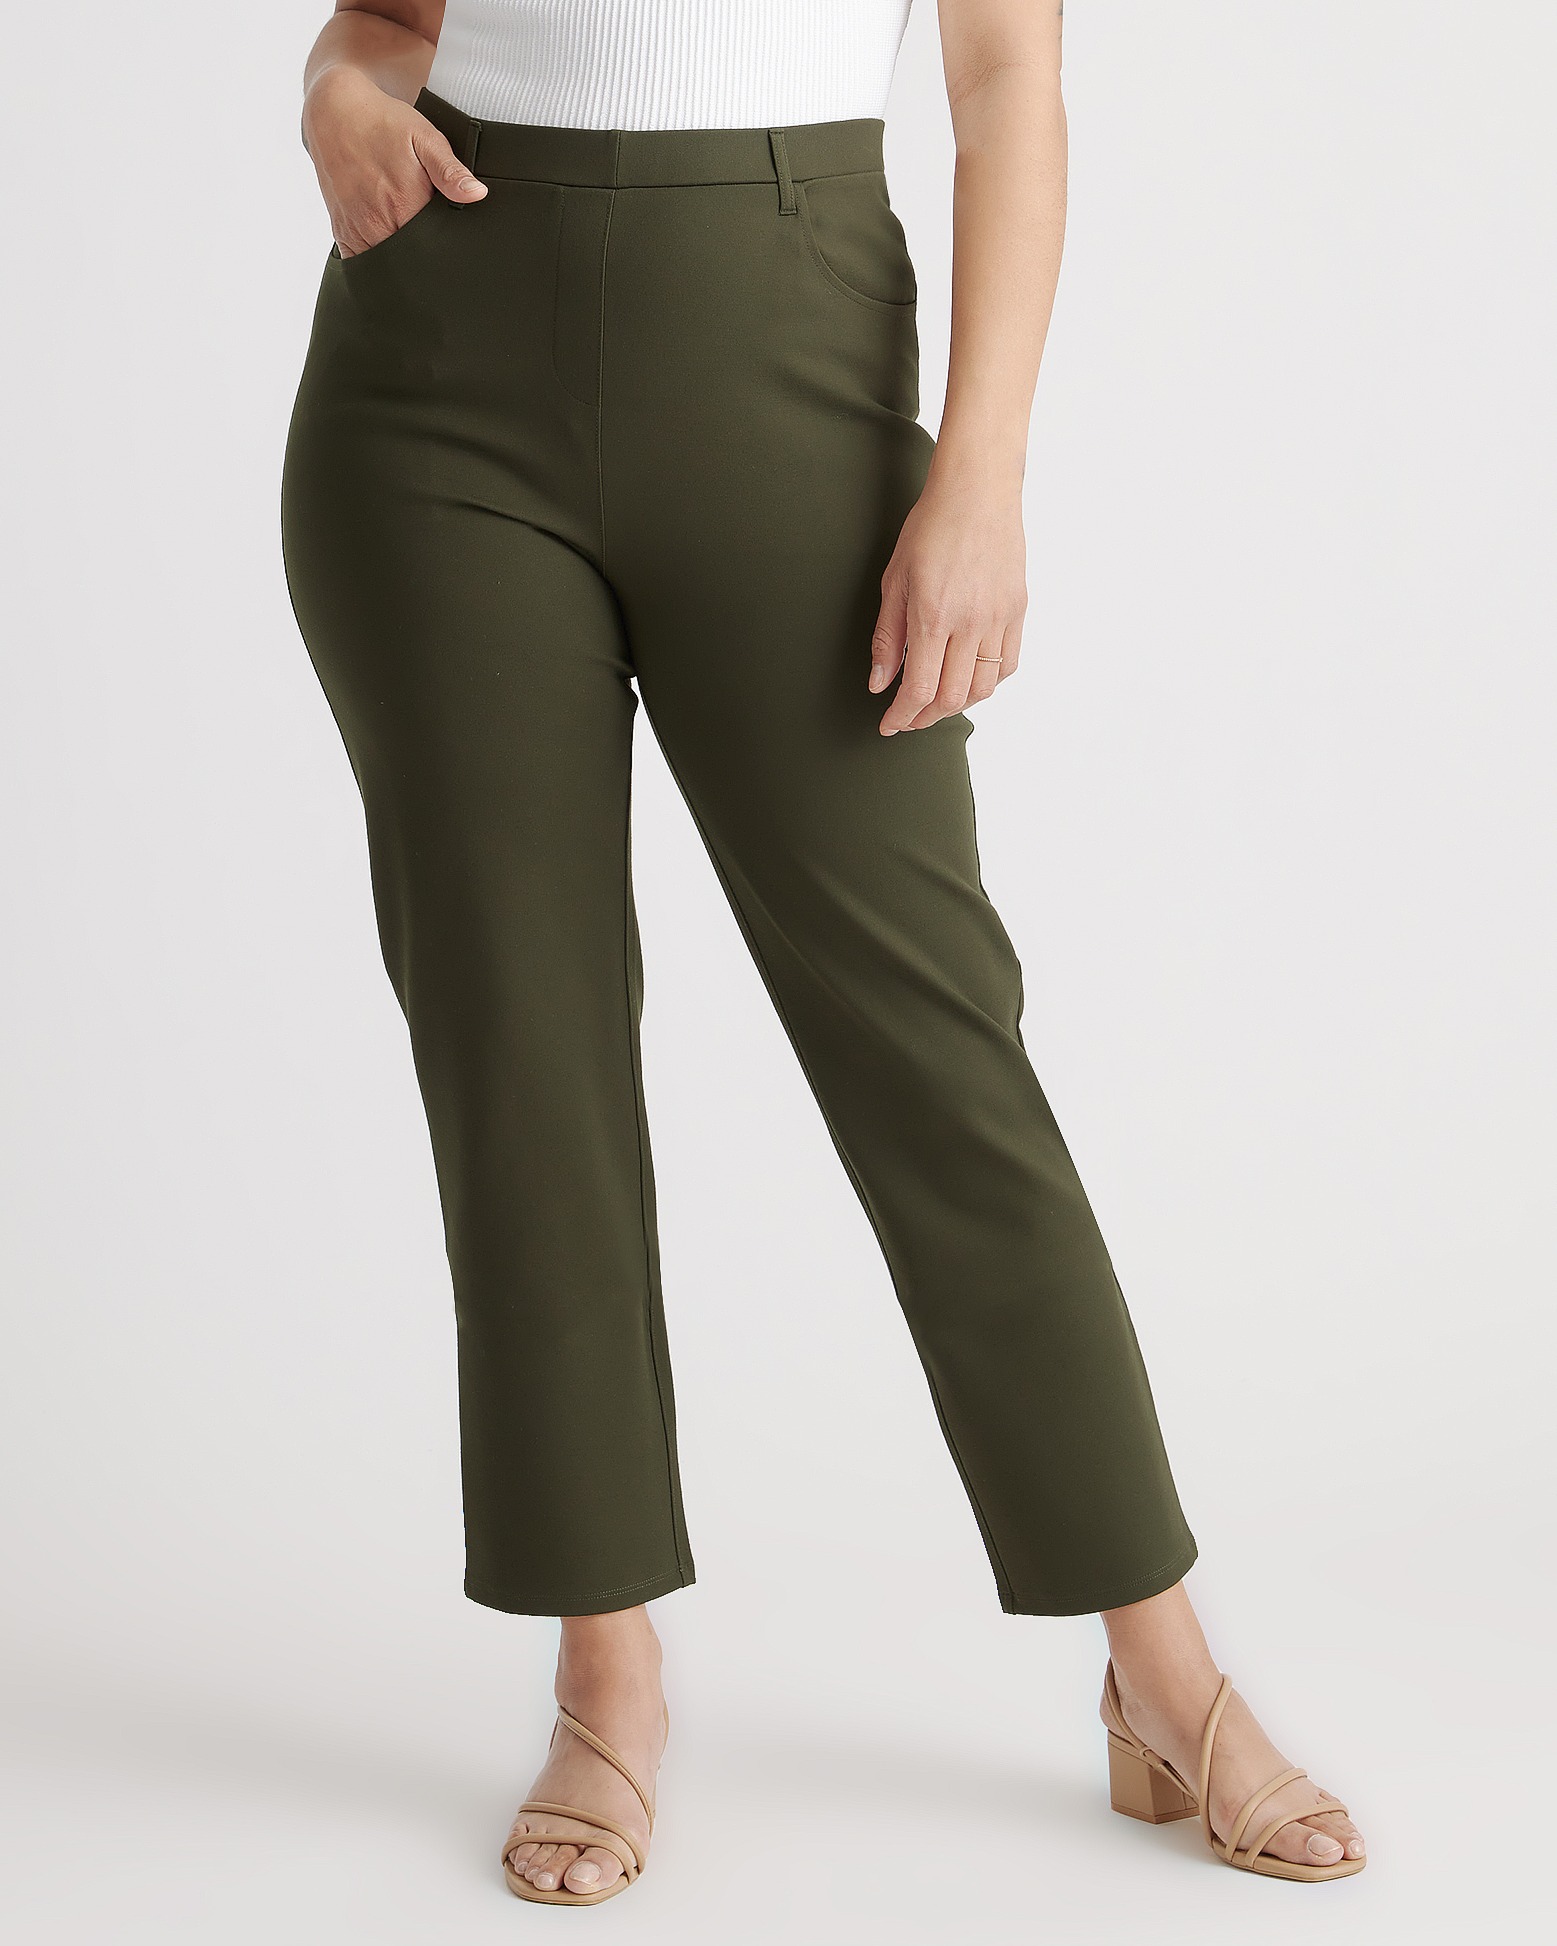 Premium Rayon Knotted Pant for Women, Both Side Pocket Casual Wear, Comfy  Office Ponte, Slim, Solid Fit Pants